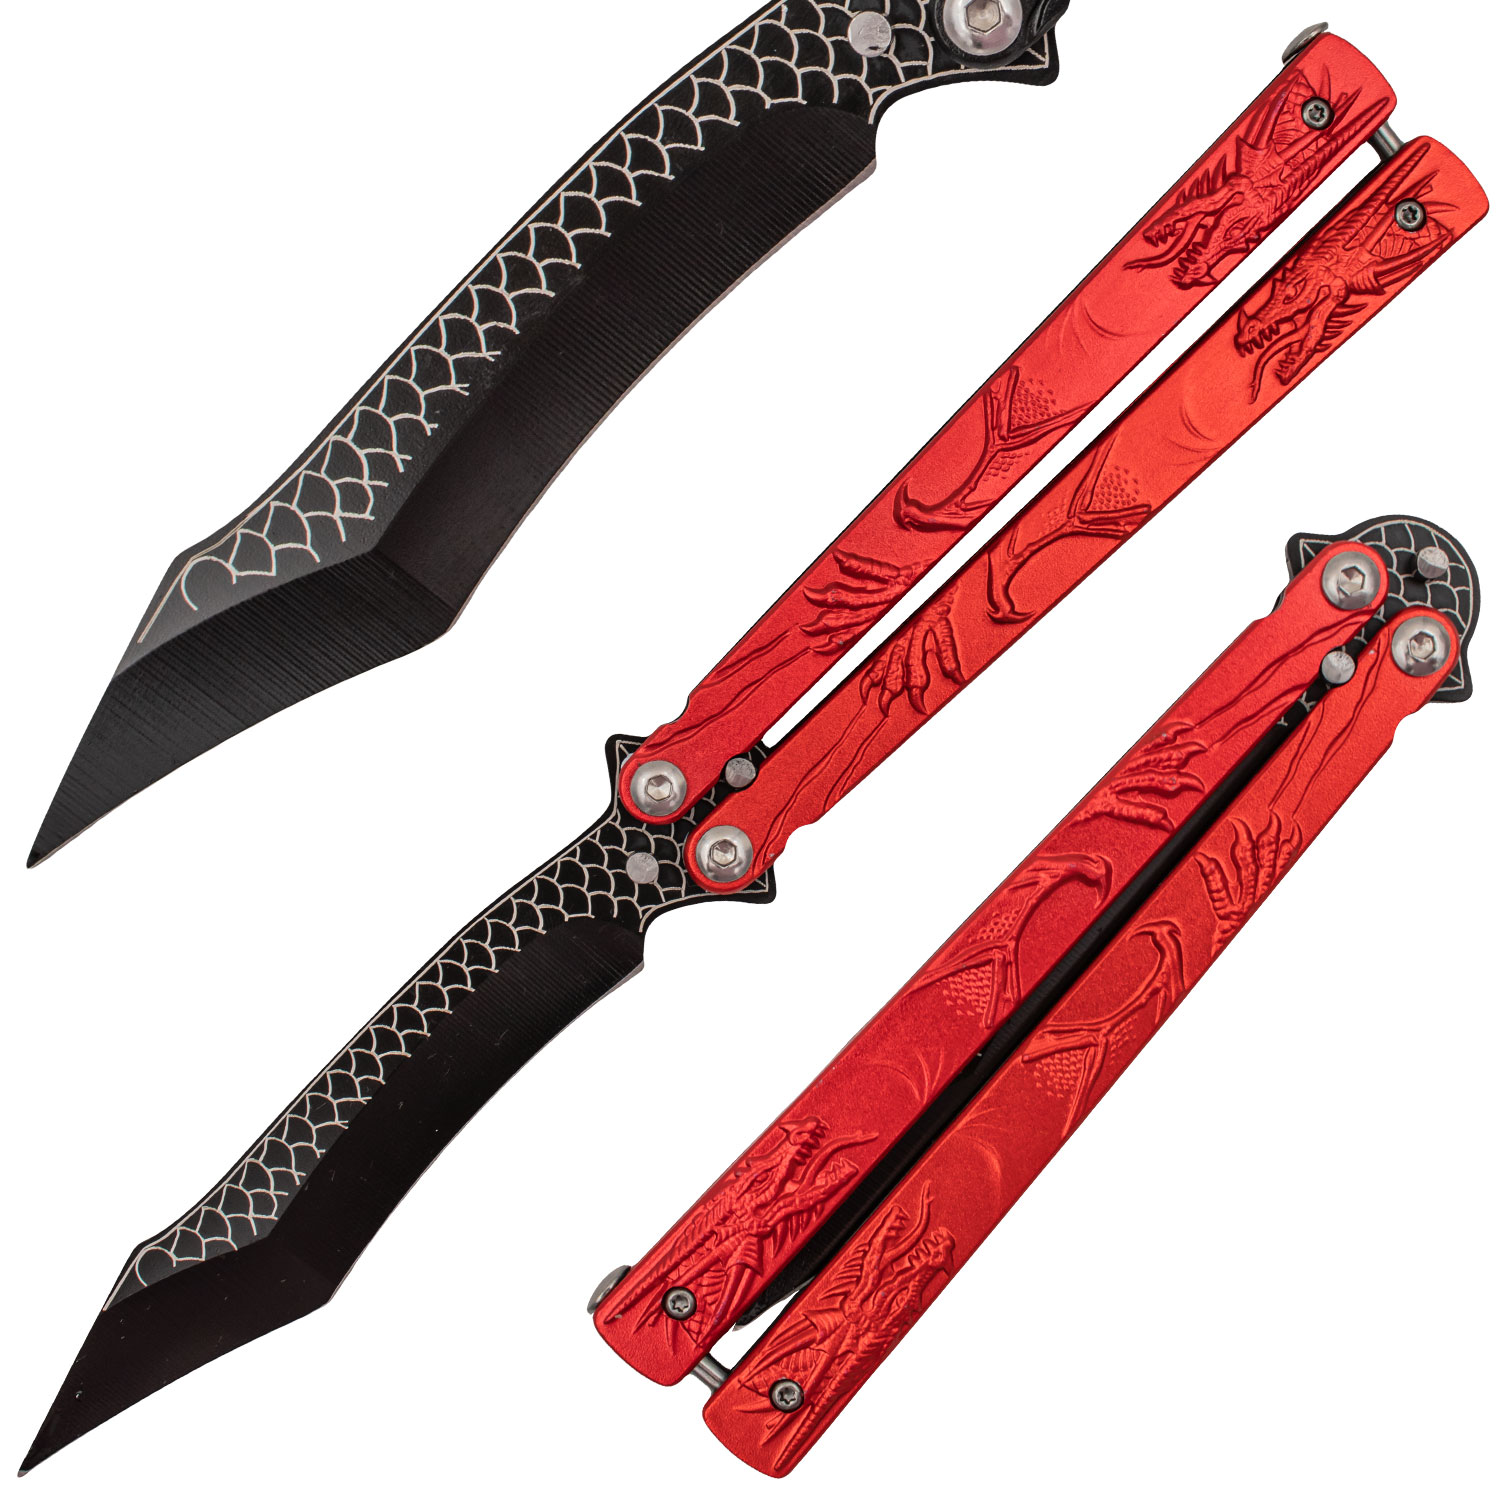 9.25 Inch Splinter The Dragon Balisong Butterfly Knife Red